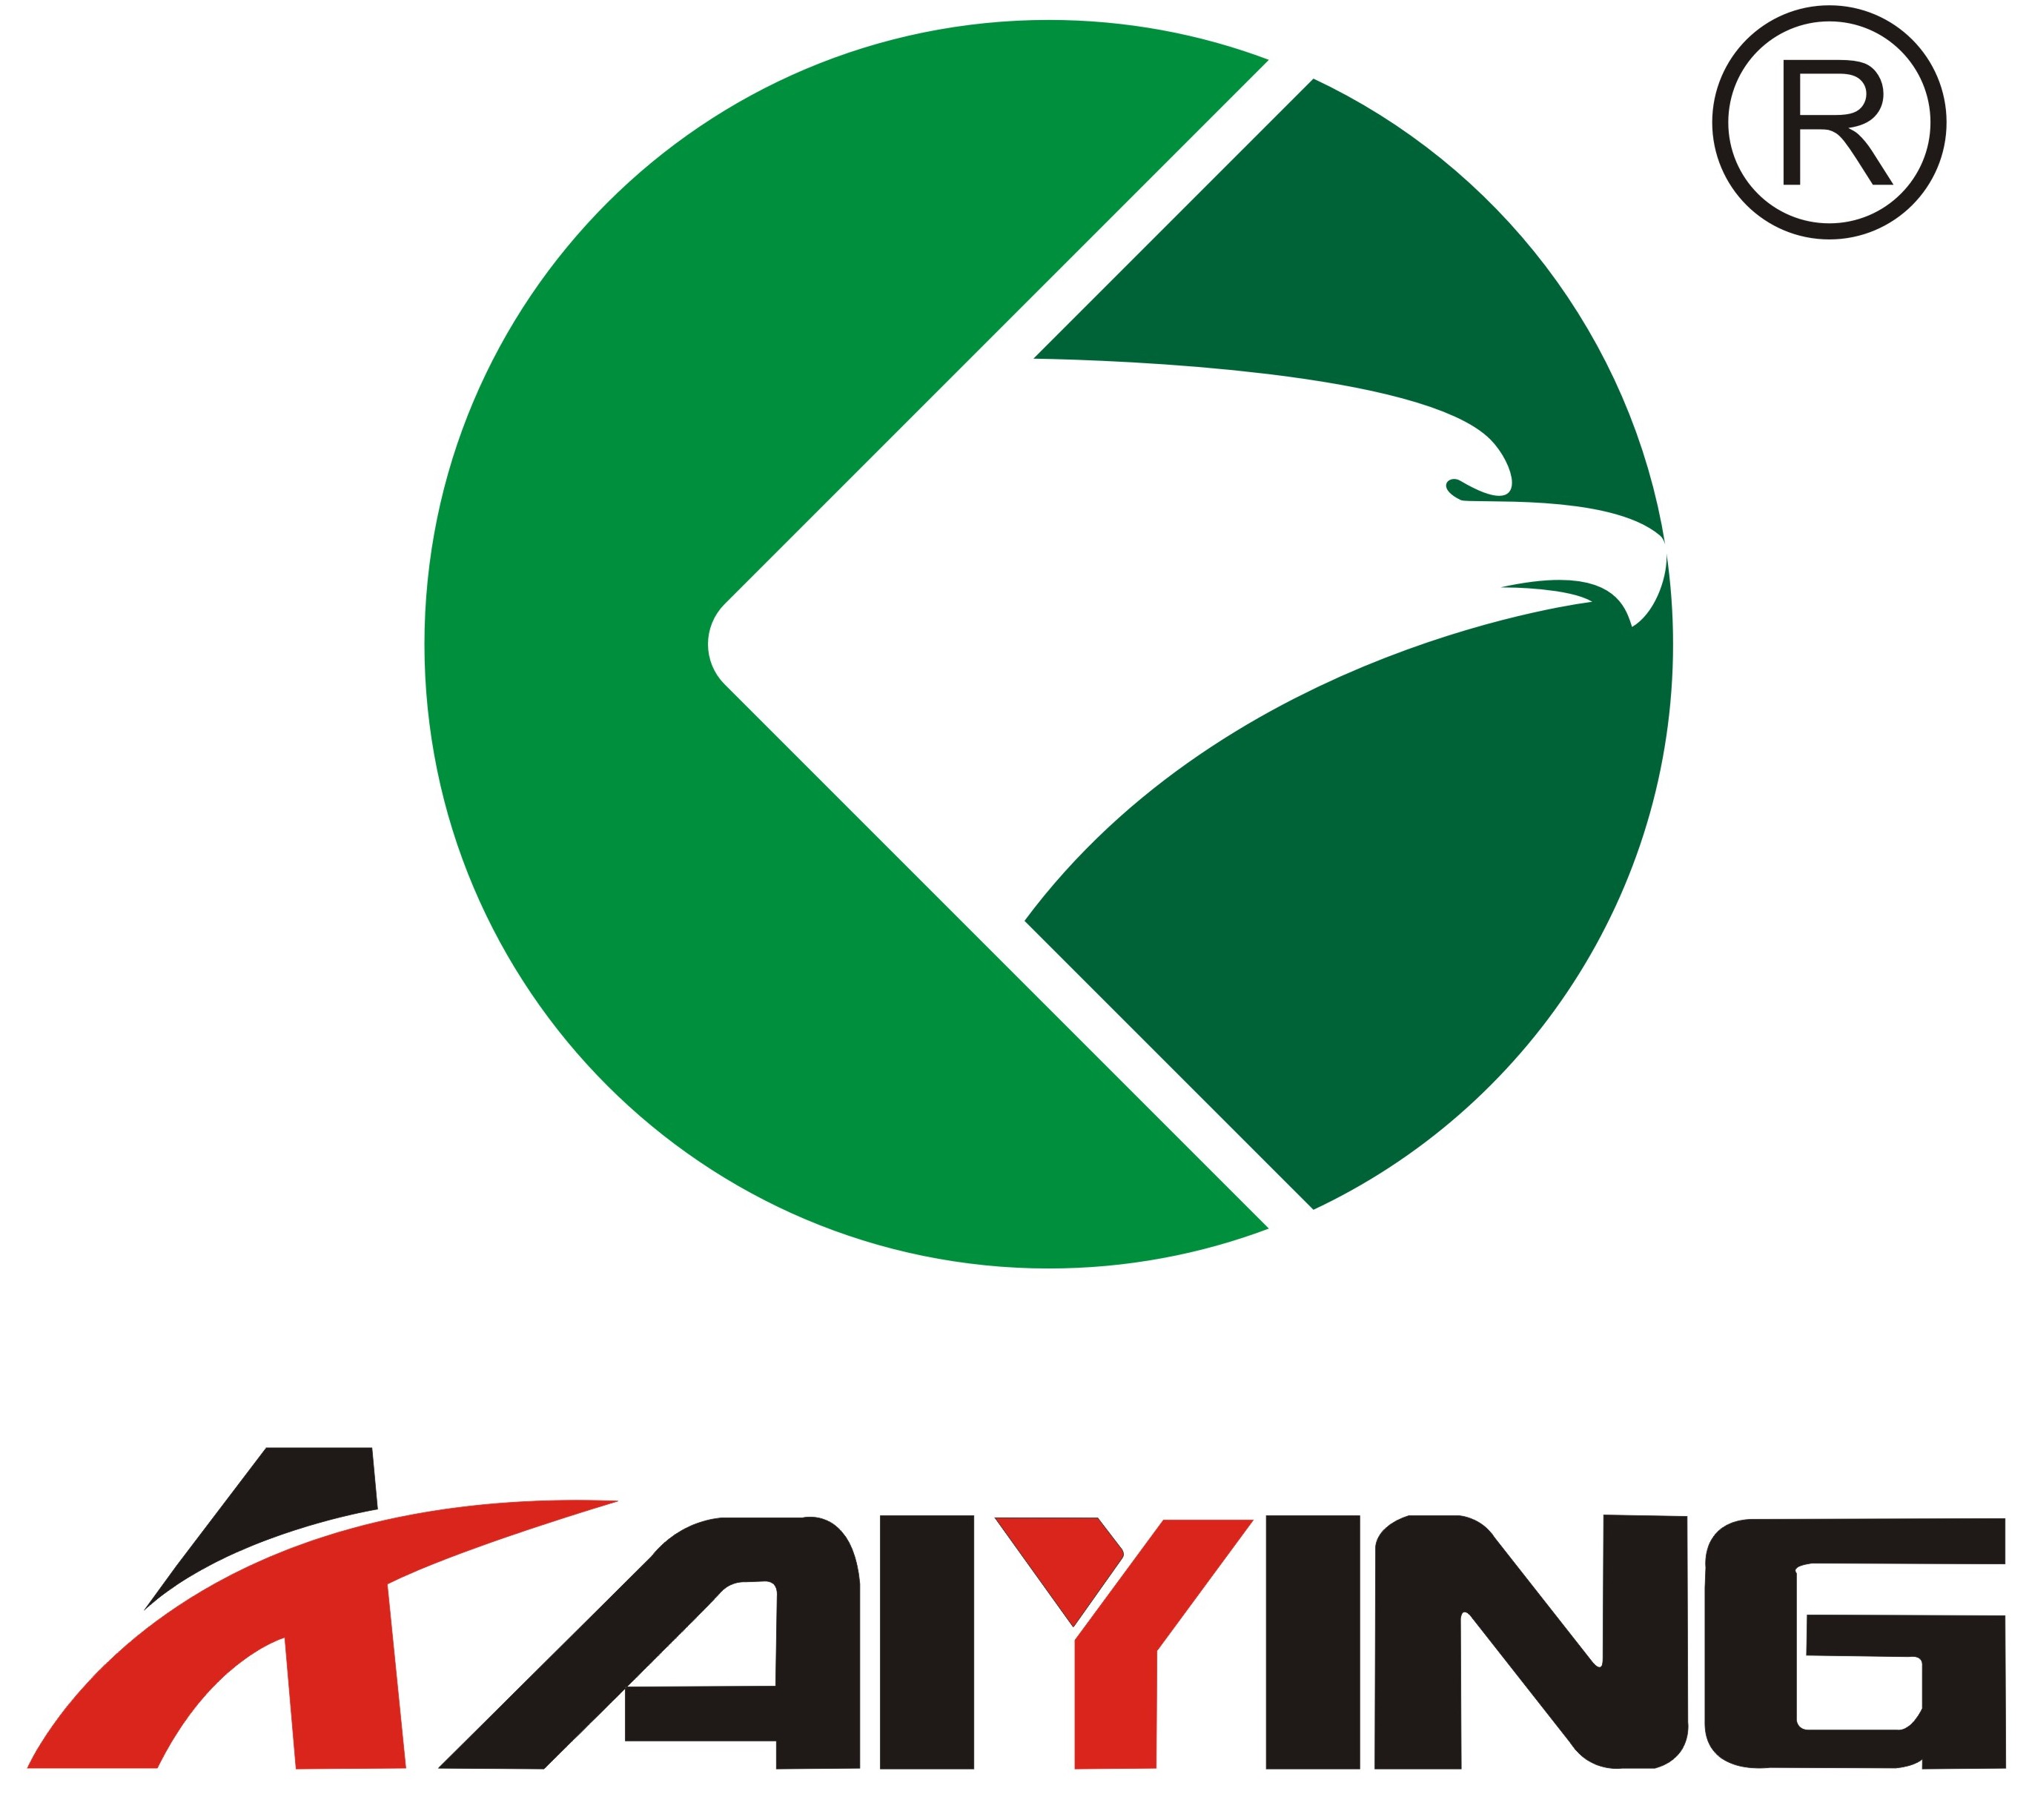 KAIYING POWER SUPPLY AND ELECTRICAL EQUIP CO., LTD